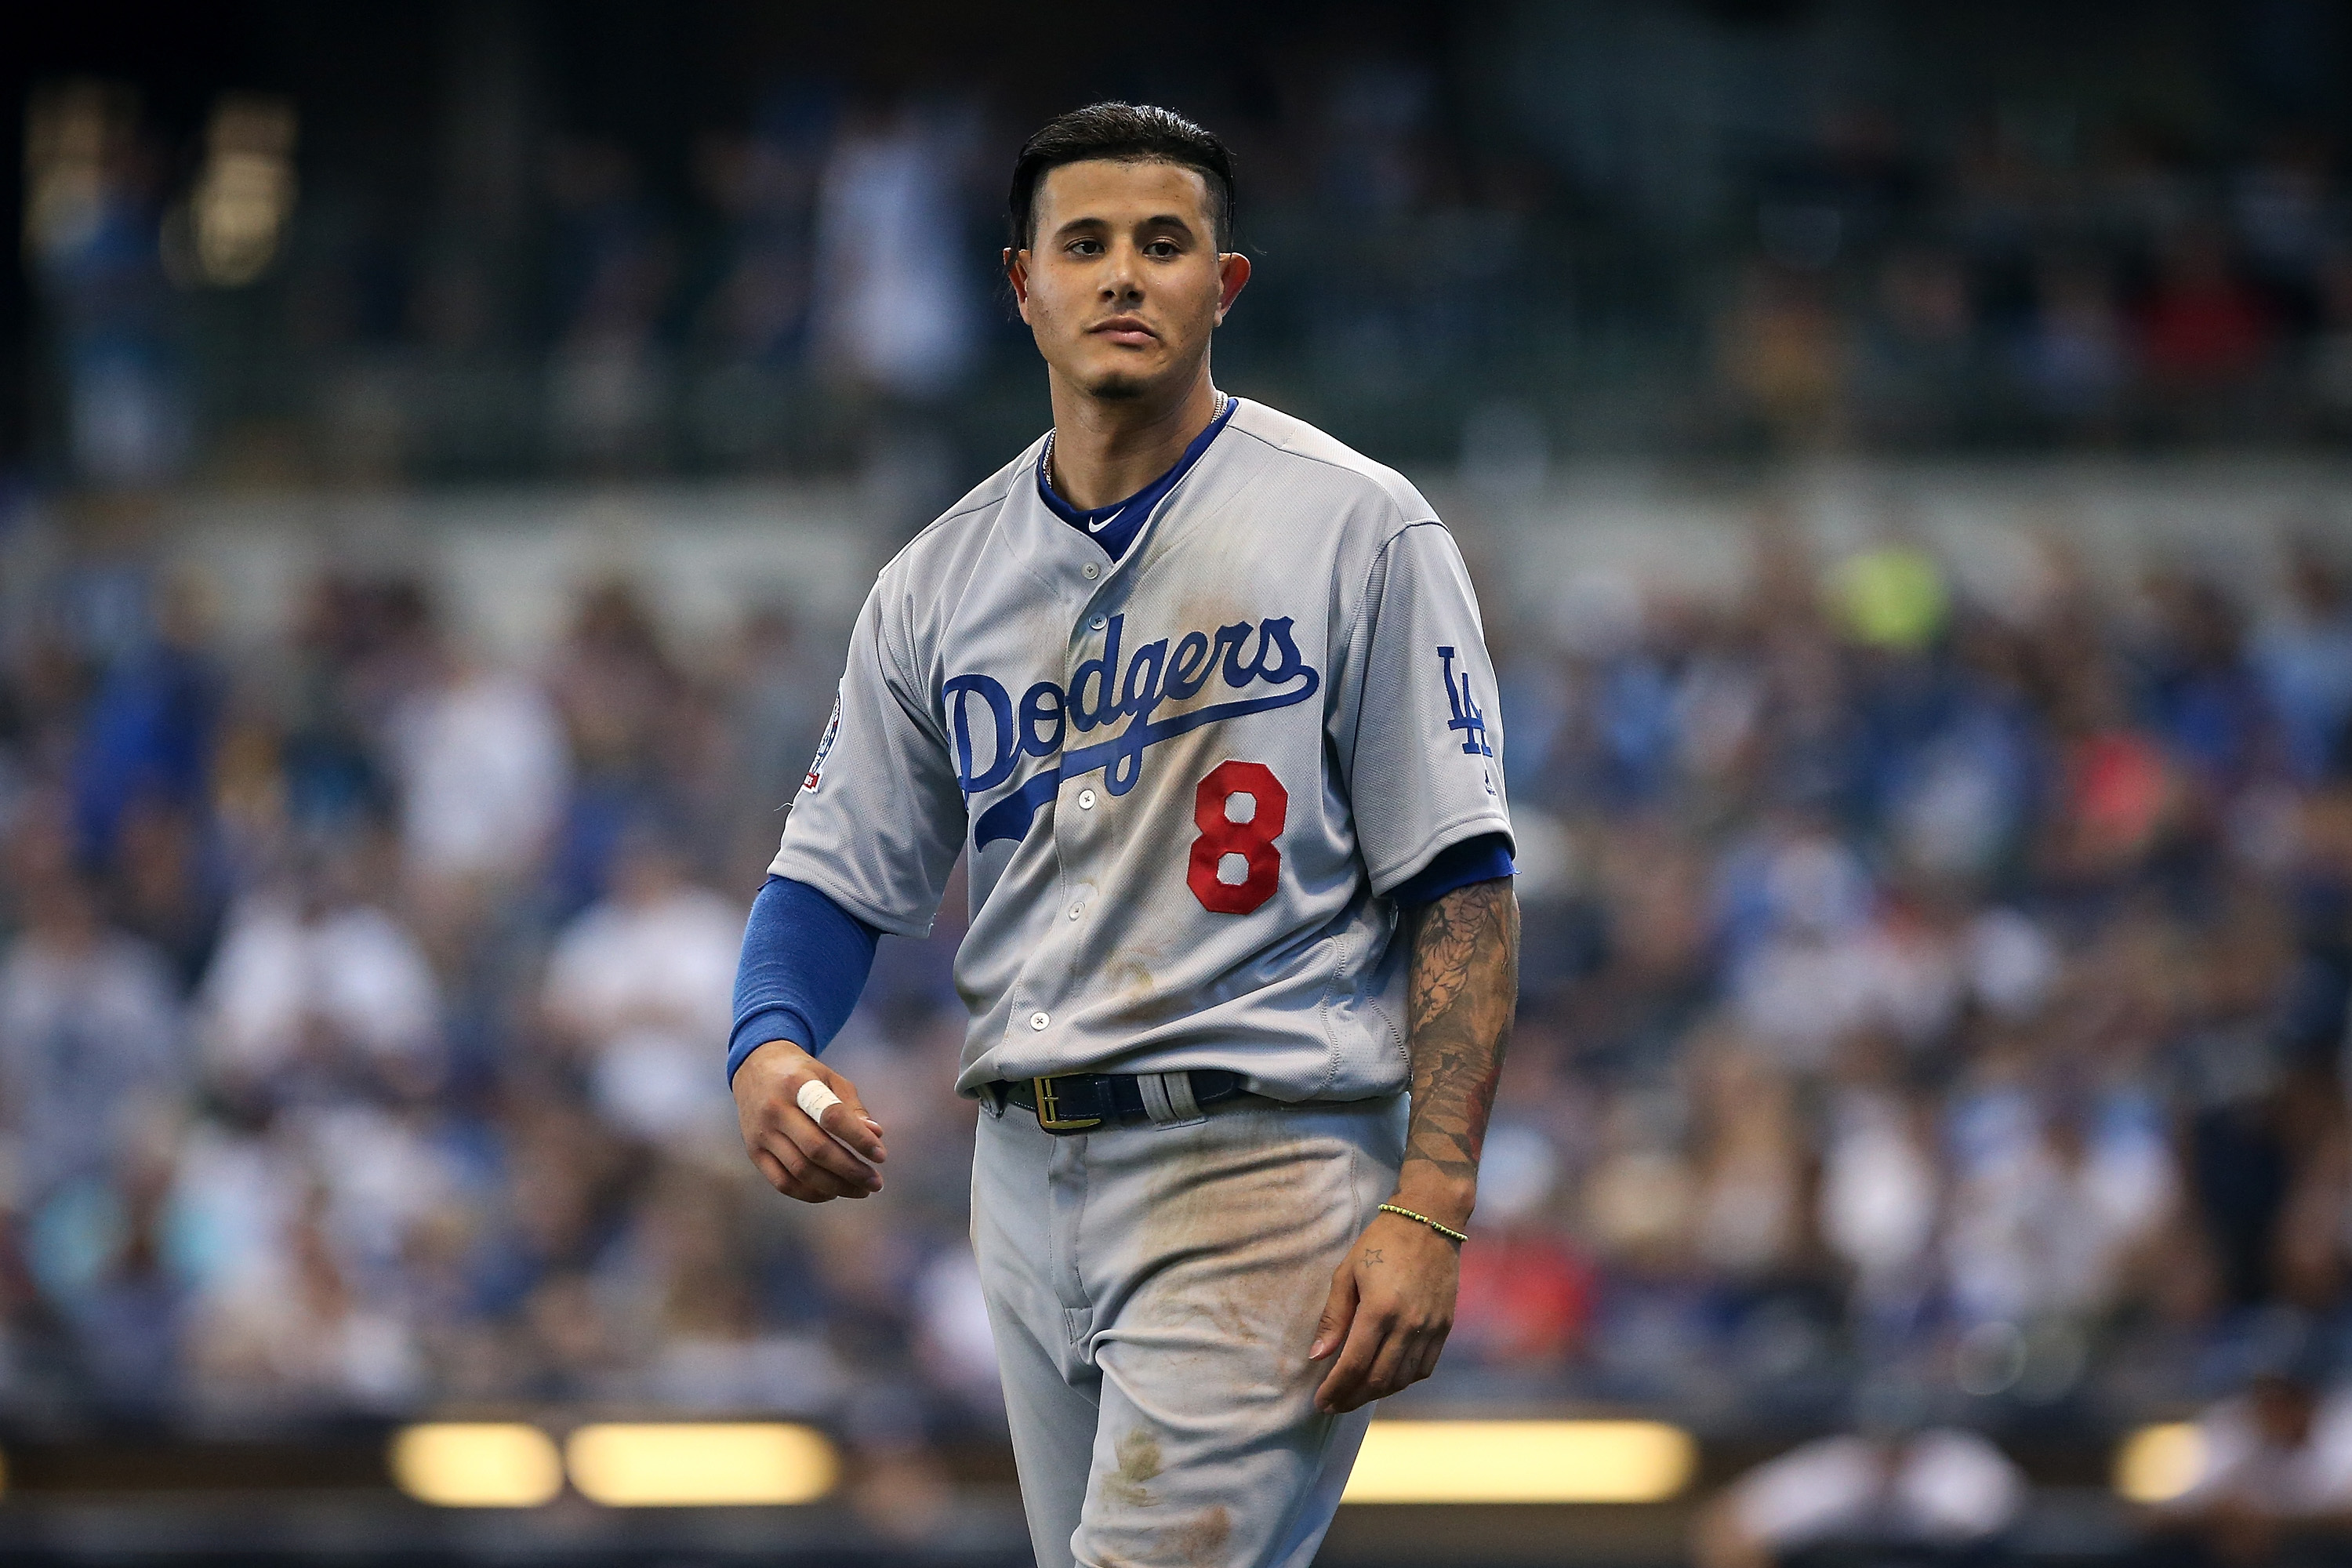 Dayton from Nebraska on X: for all the troubles the Dodgers may be in for  signing international players, the real crime is Manny Machado's hair   / X